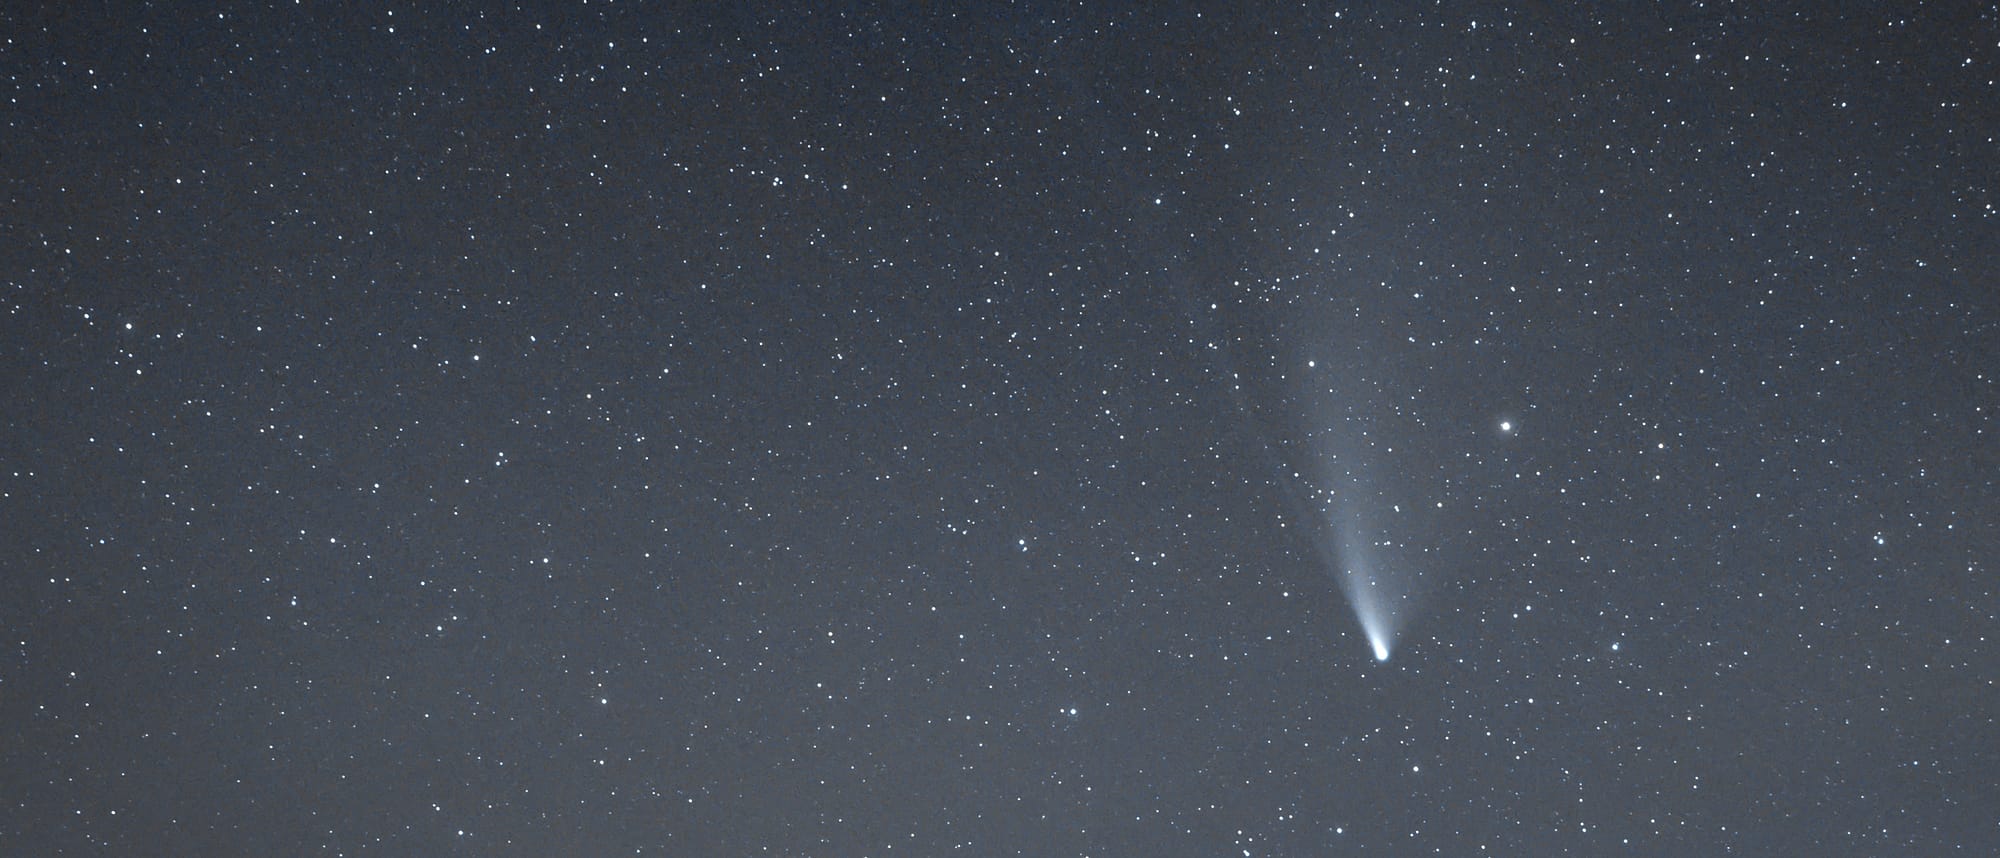 Comet NEOWISE Dust Trail